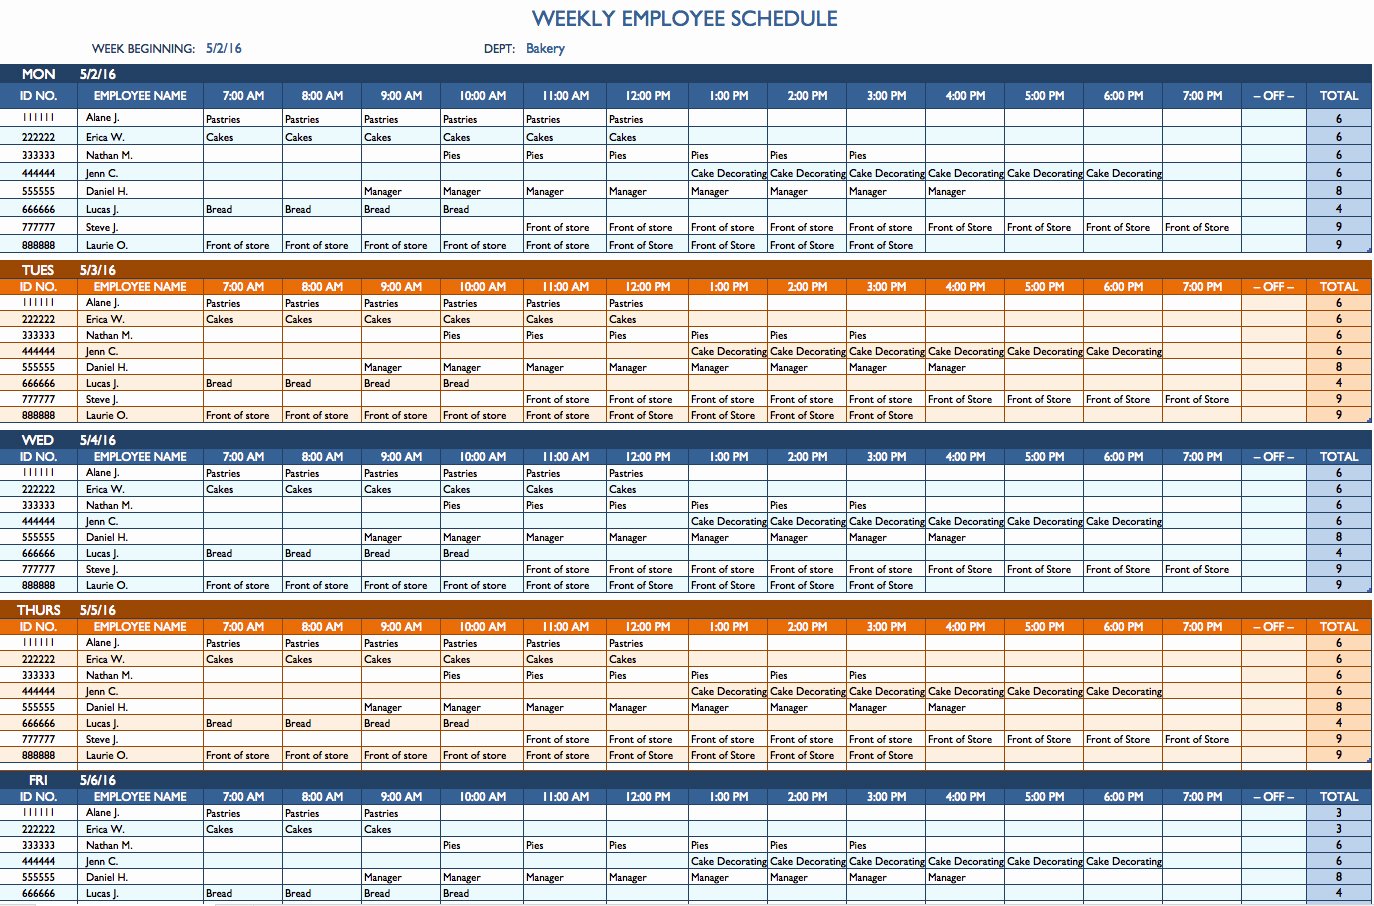 On Call Schedule Template Excel Inspirational Free Weekly Schedule Templates for Excel Smartsheet